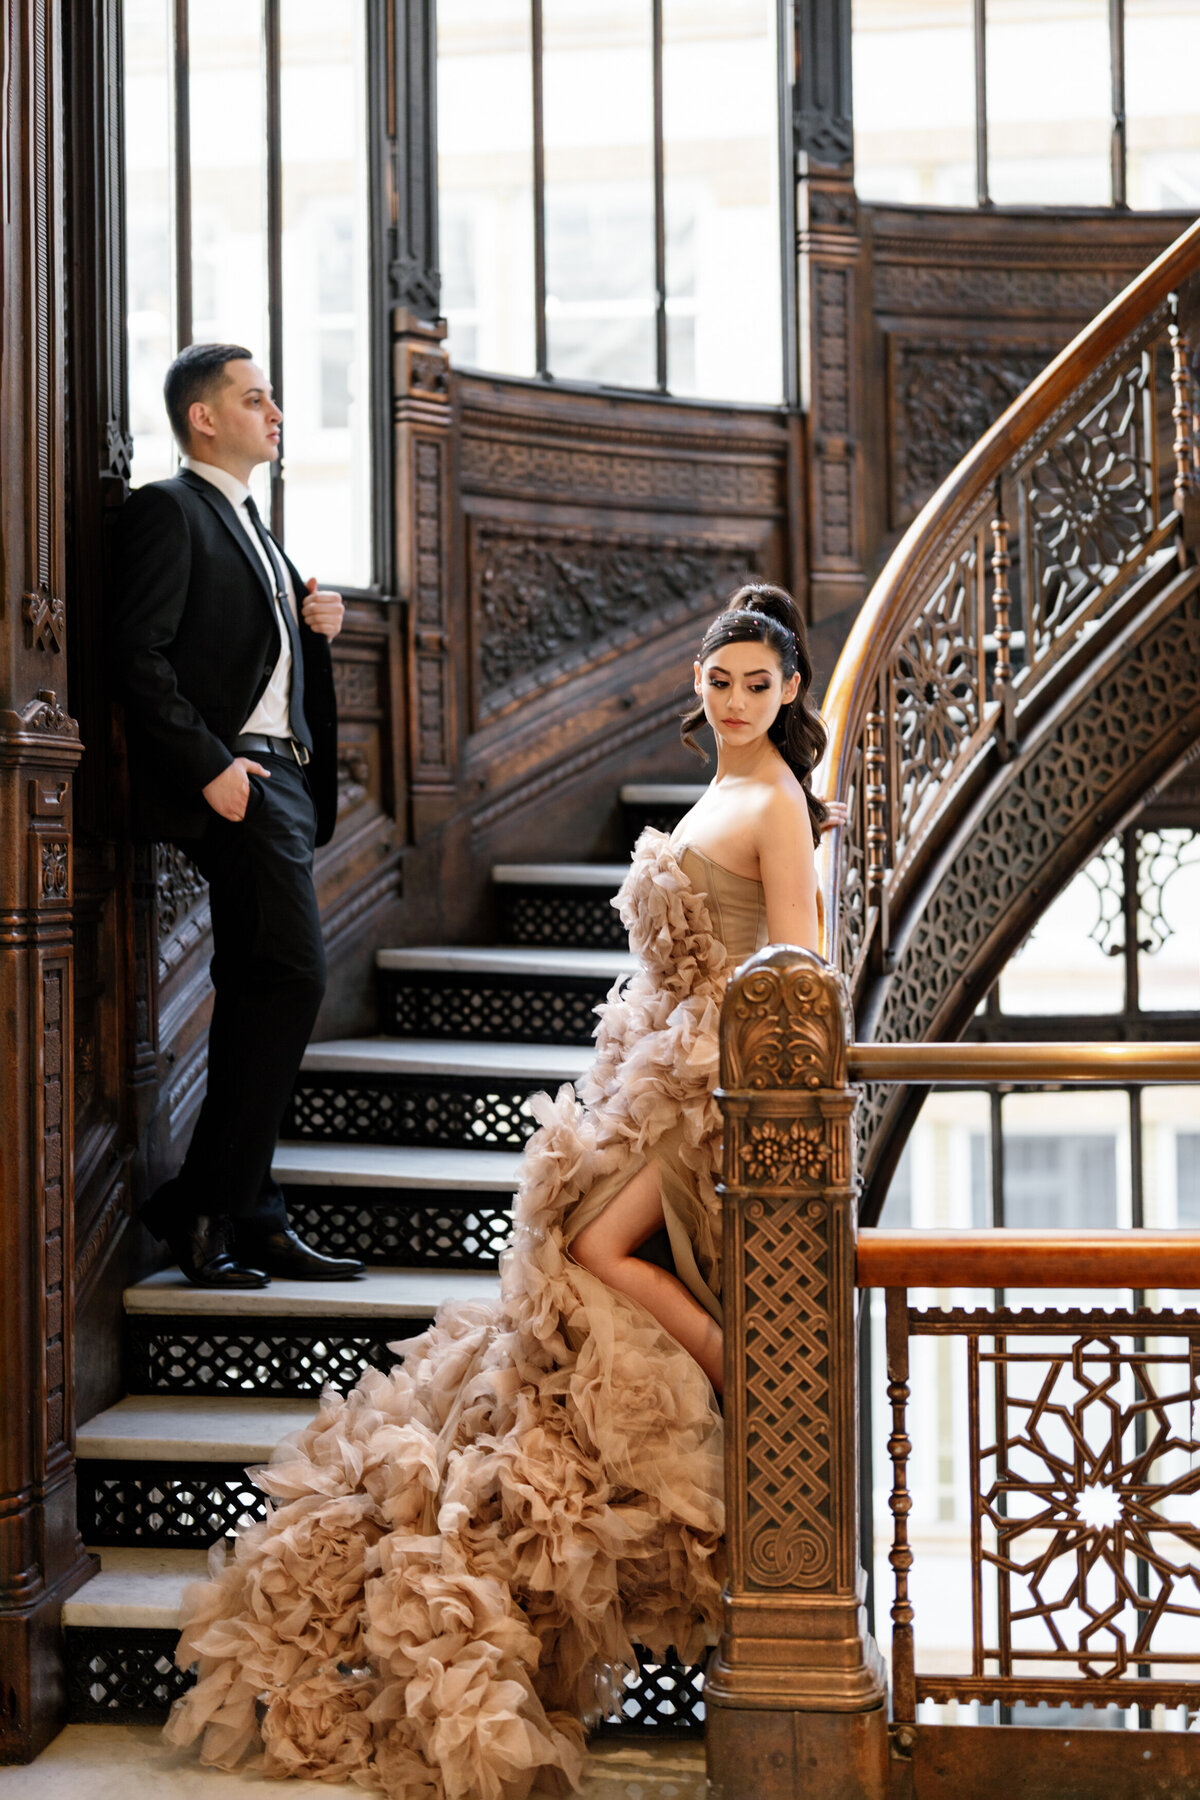 Aspen-Avenue-Chicago-Wedding-Photographer-Rookery-Engagement-Session-Histoircal-Stairs-Moody-Dramatic-Magazine-Unique-Gown-Stemming-From-Love-Emily-Rae-Bridal-Hair-FAV-1